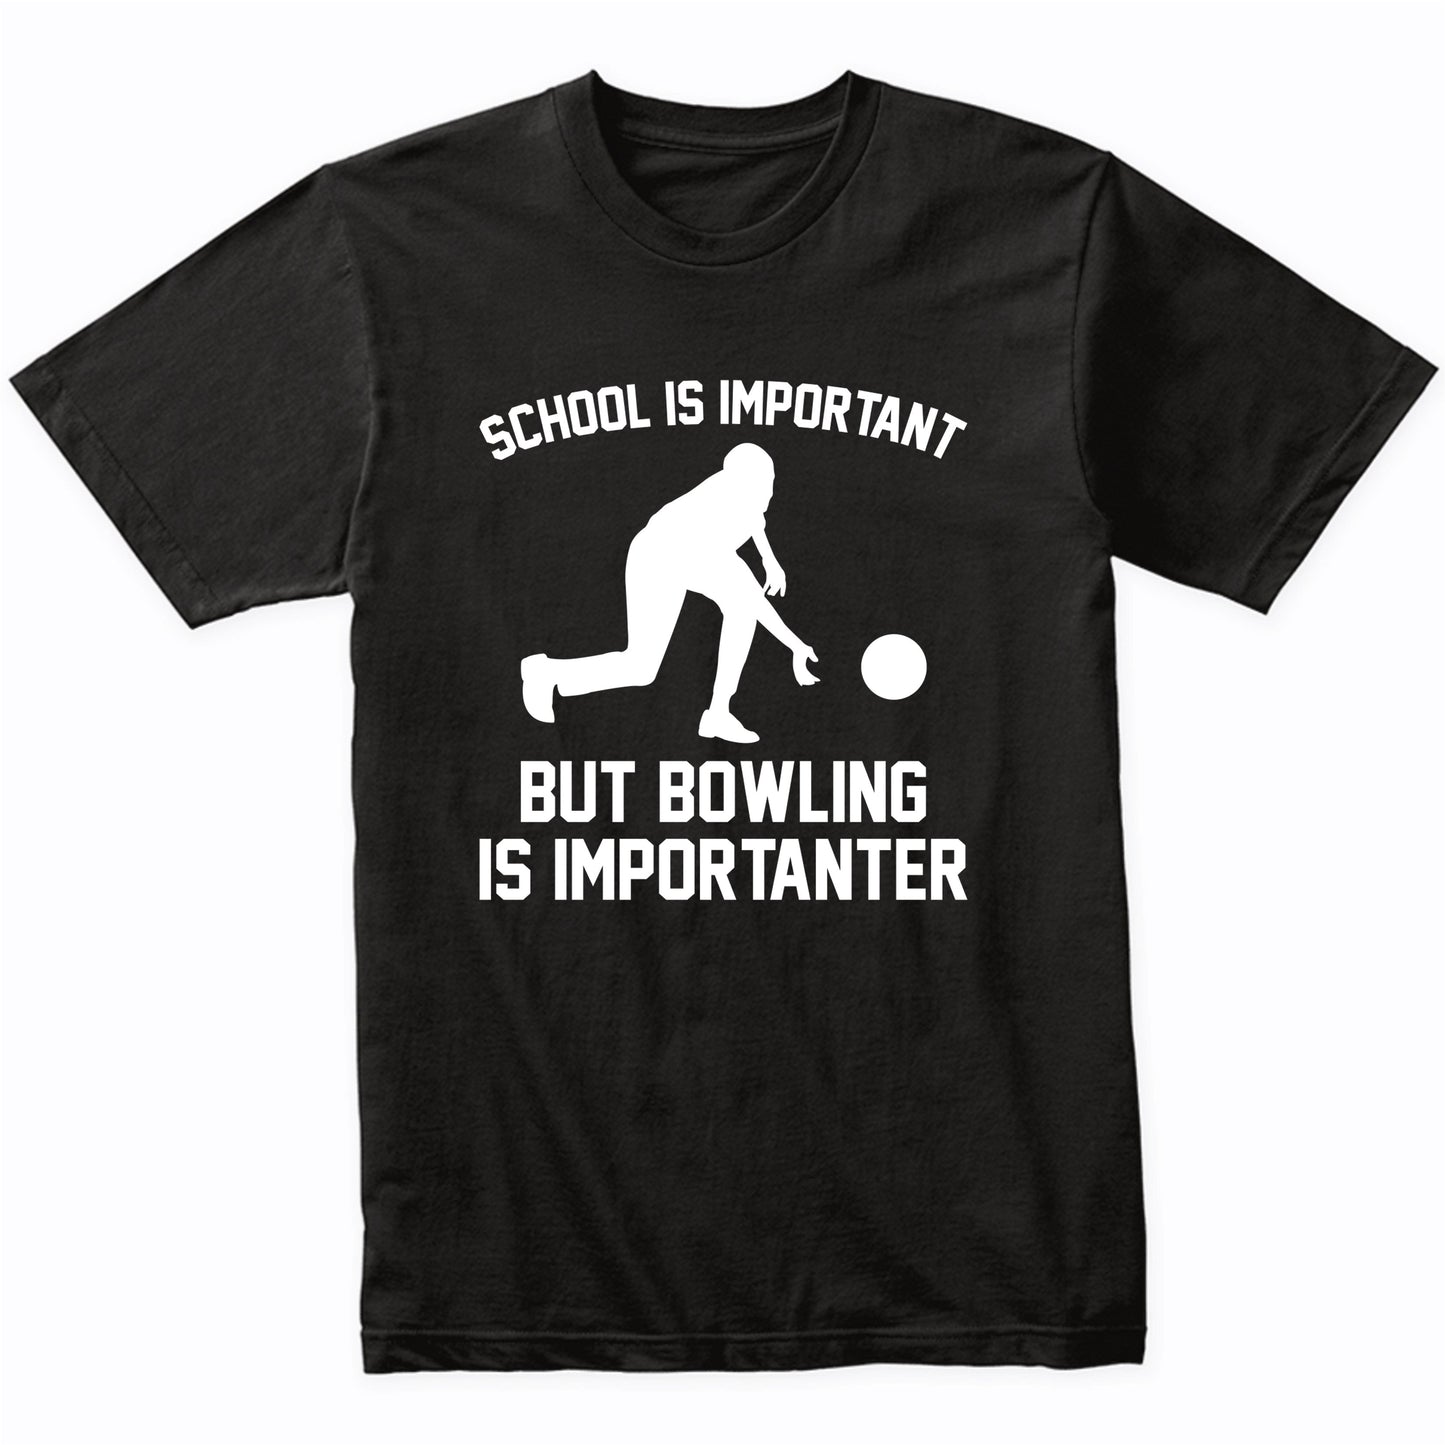 School Is Important But Bowling Is Importanter Funny Shirt